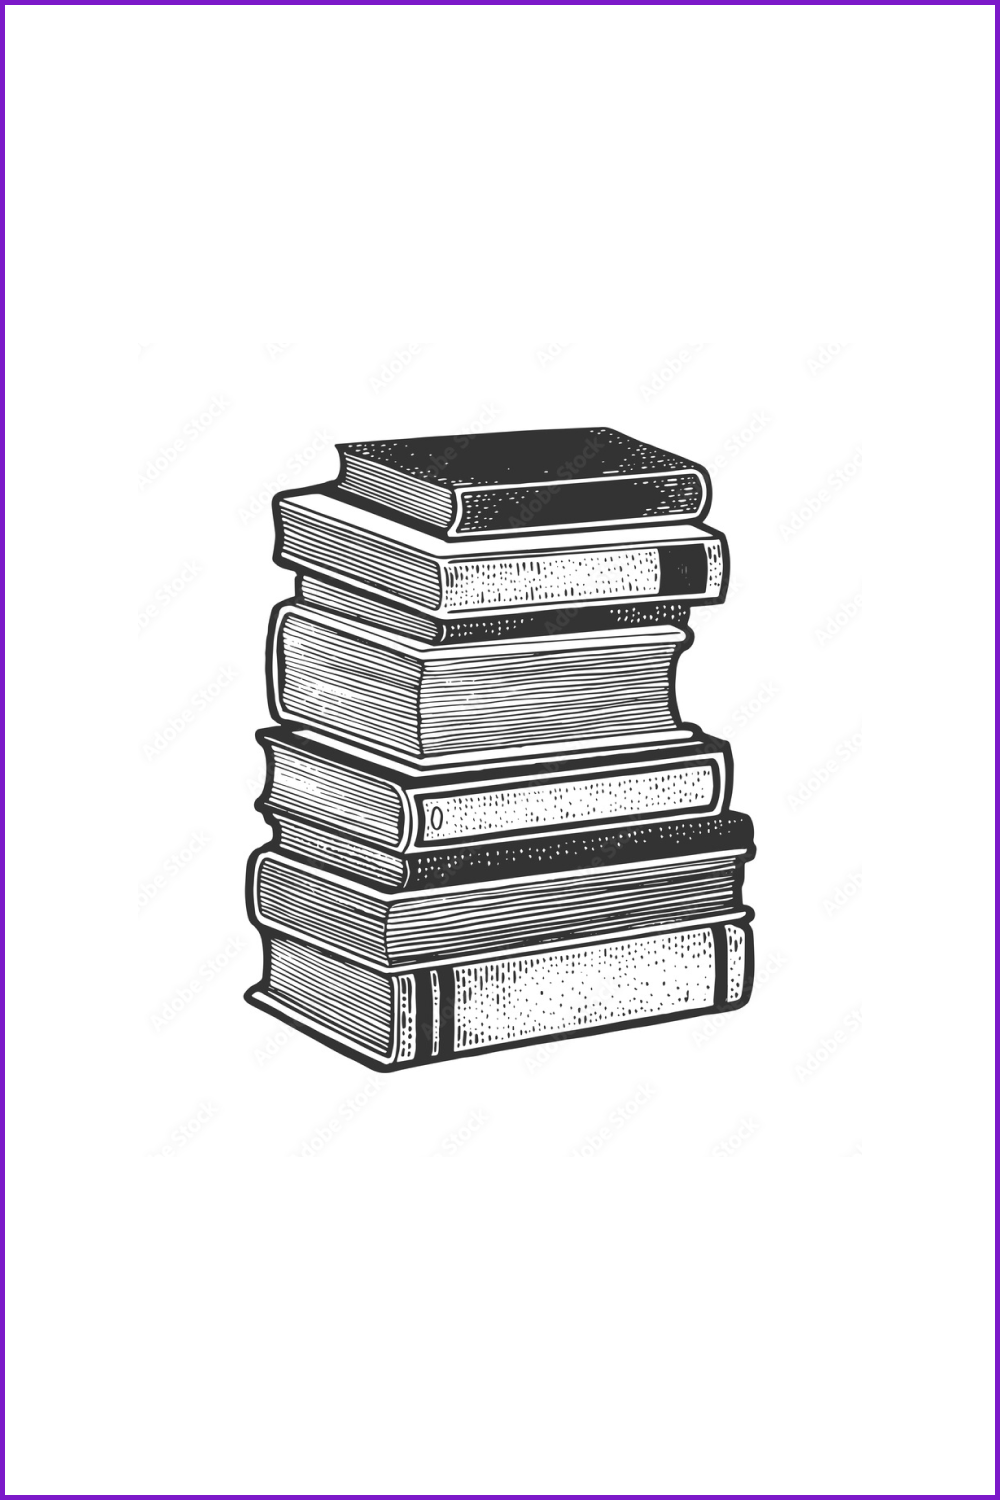 Sketch of black and white books in a stack.